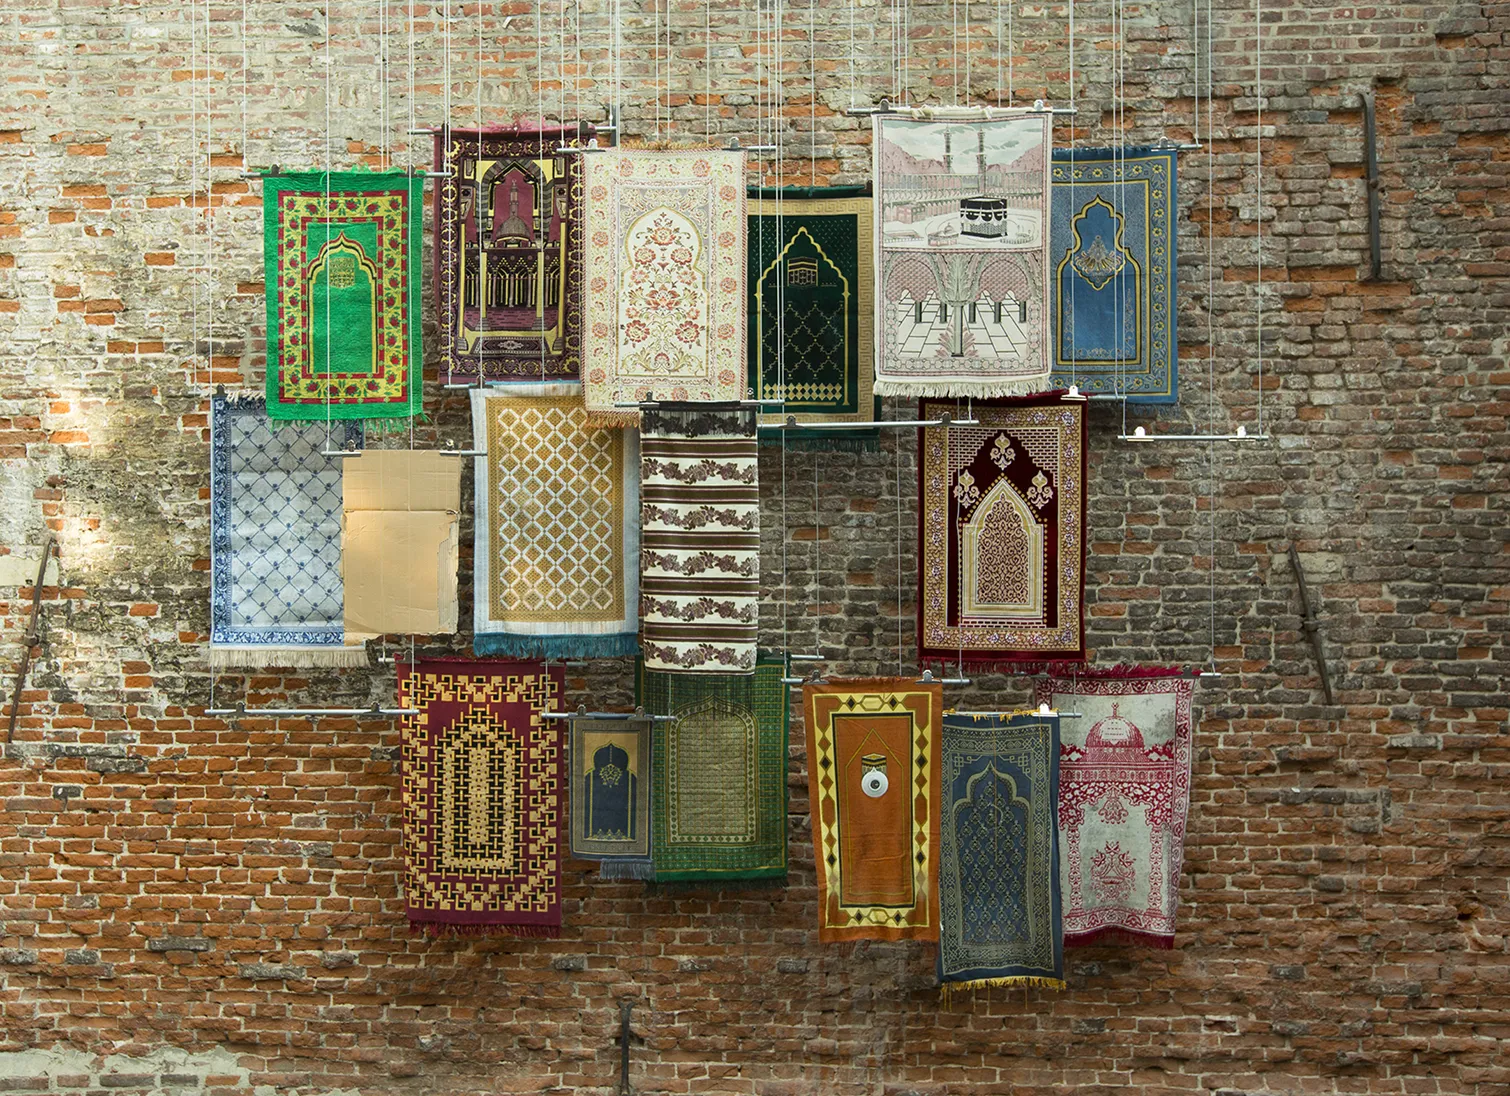 Photograph of an art installation featuring a selection of prayer rugs suspended in front of a brick wall.